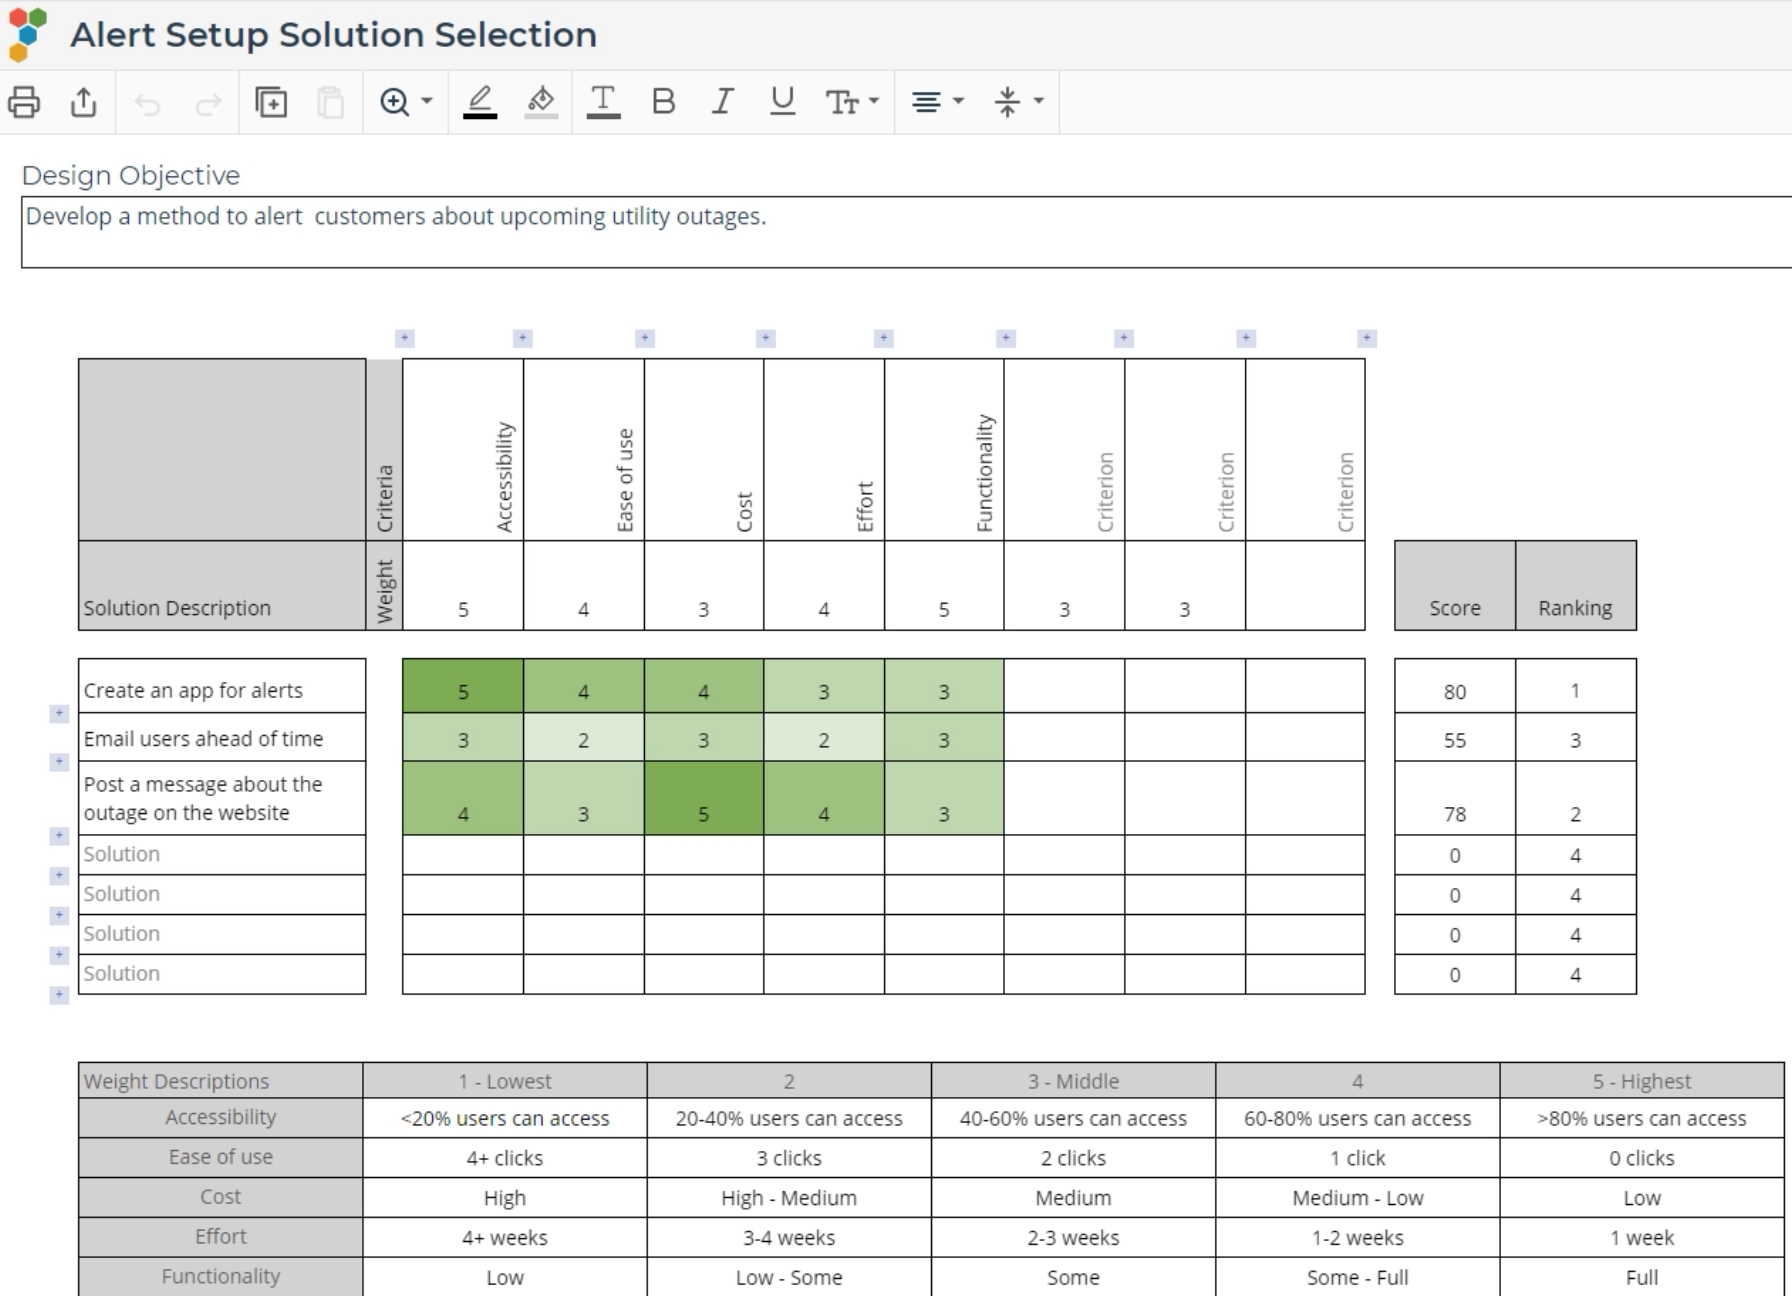 Solution selection template with completed input.